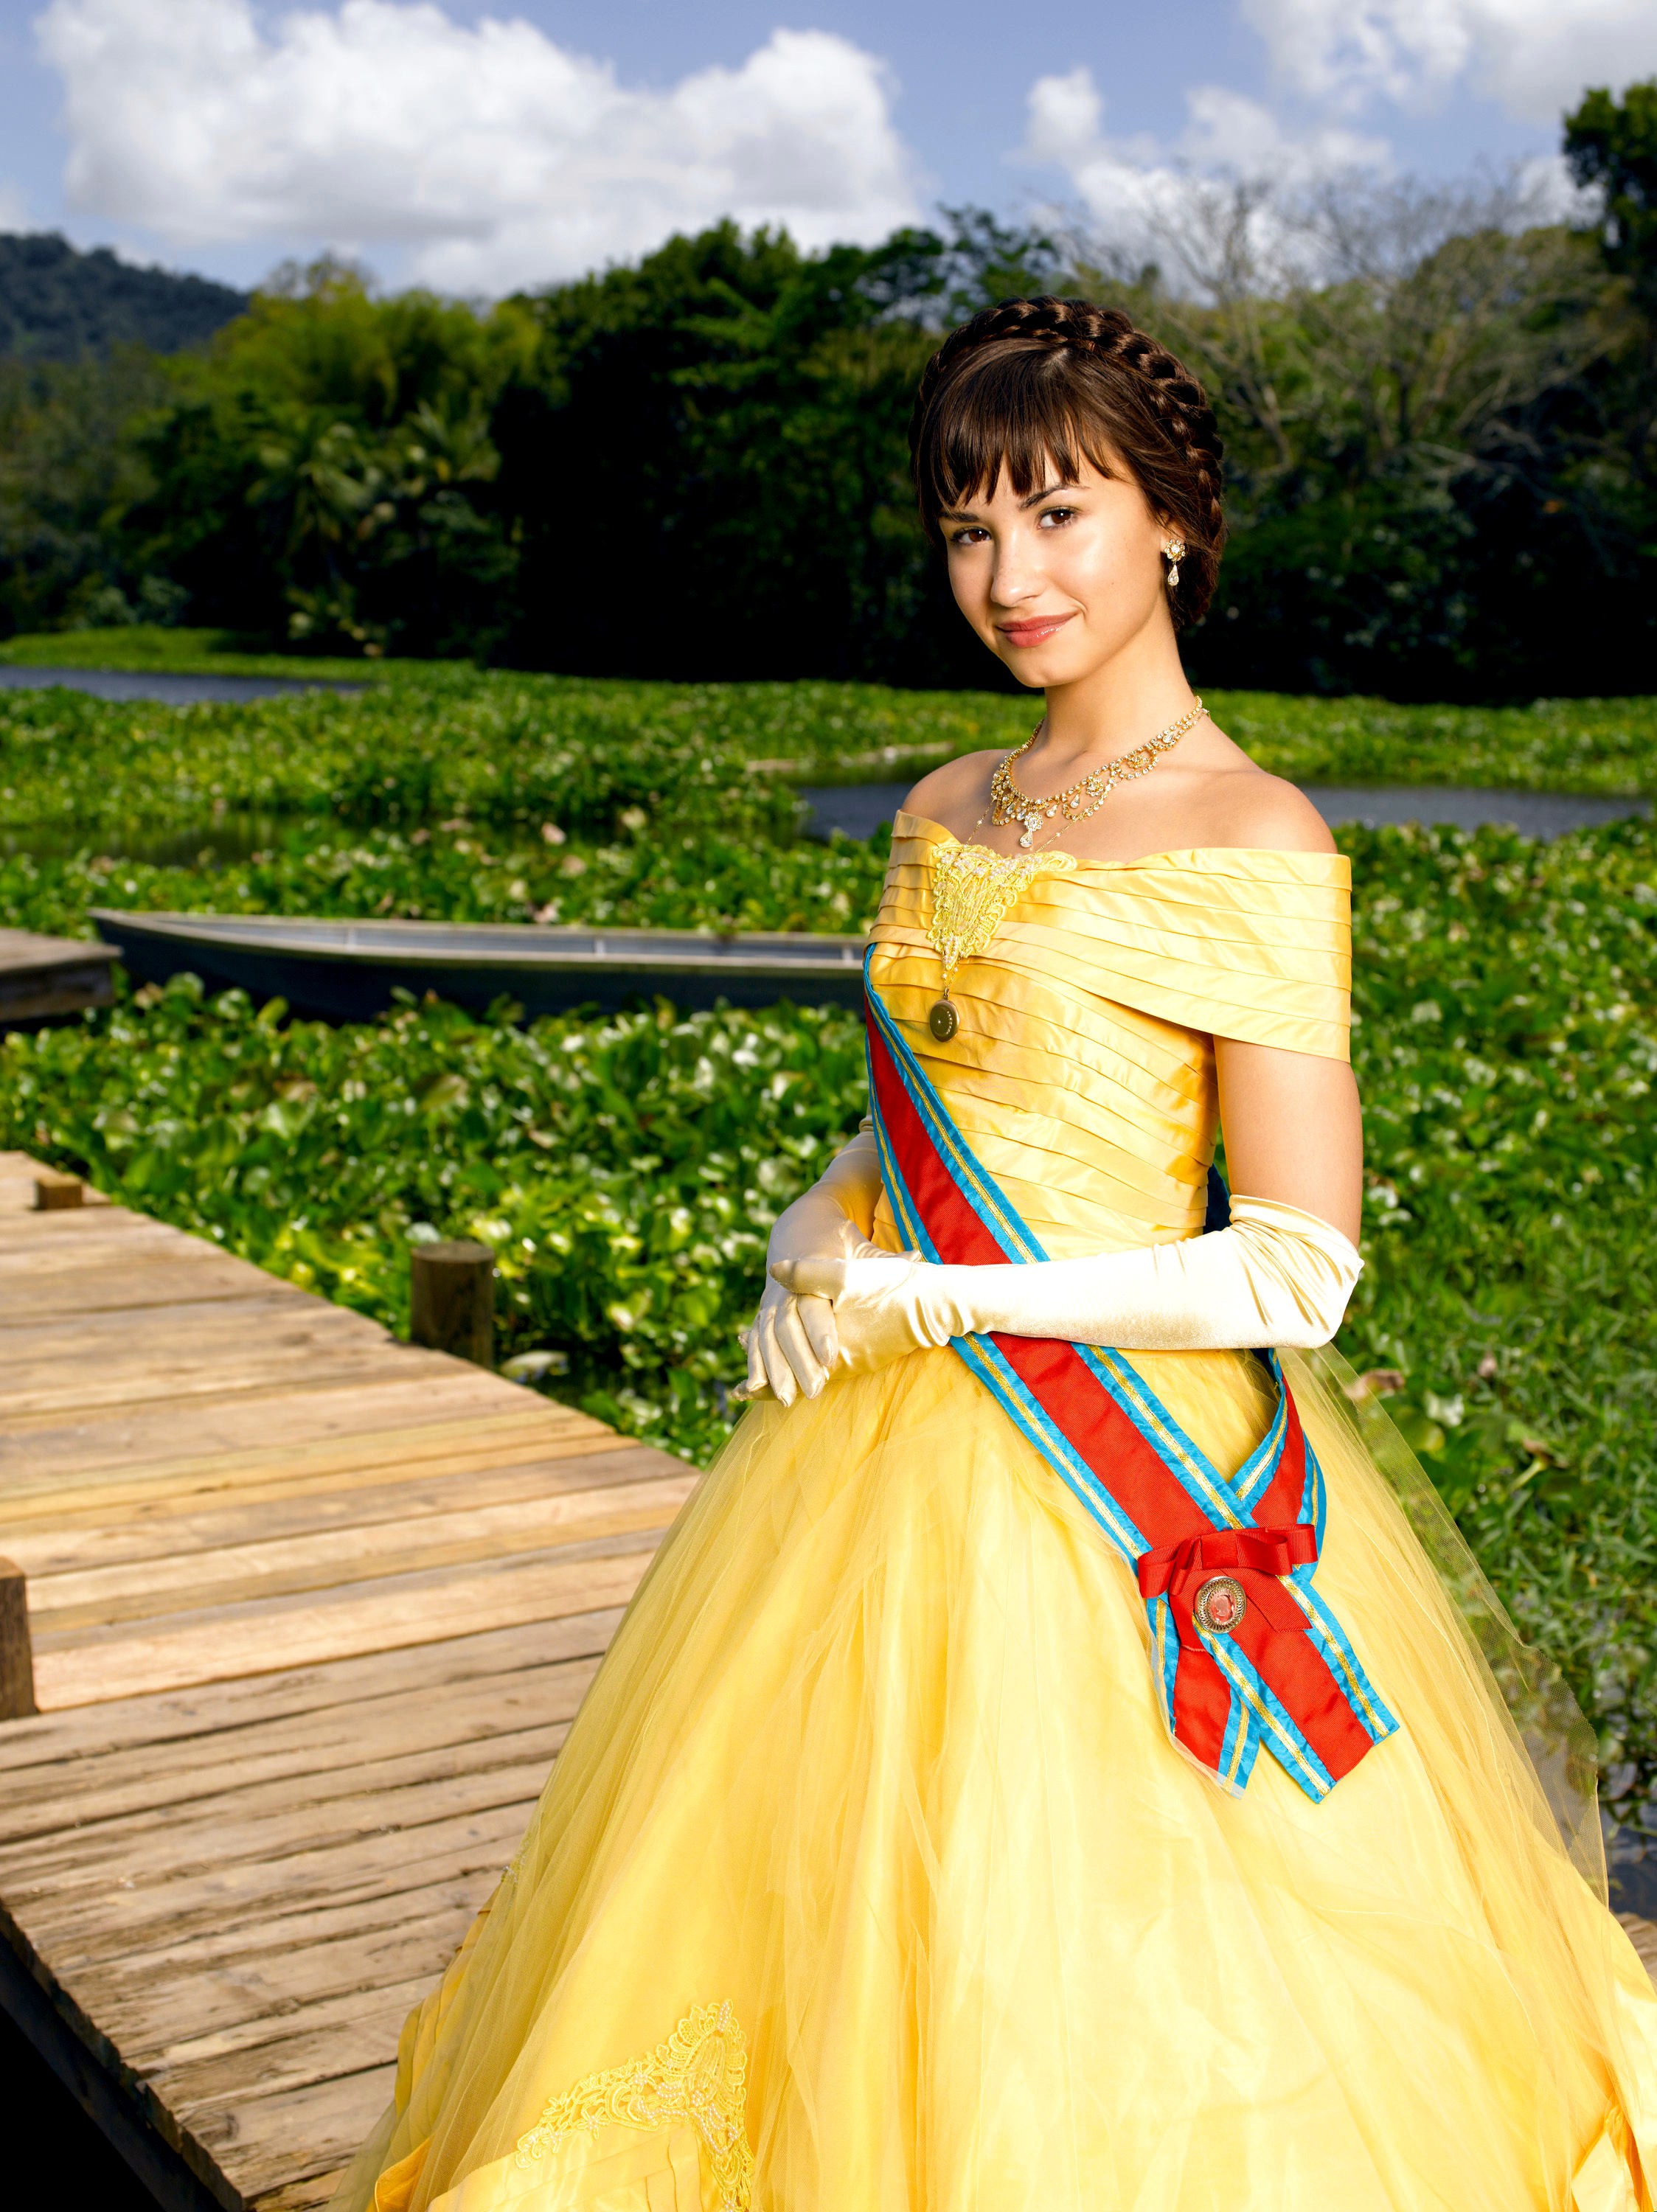 What Is Princess Protection Program